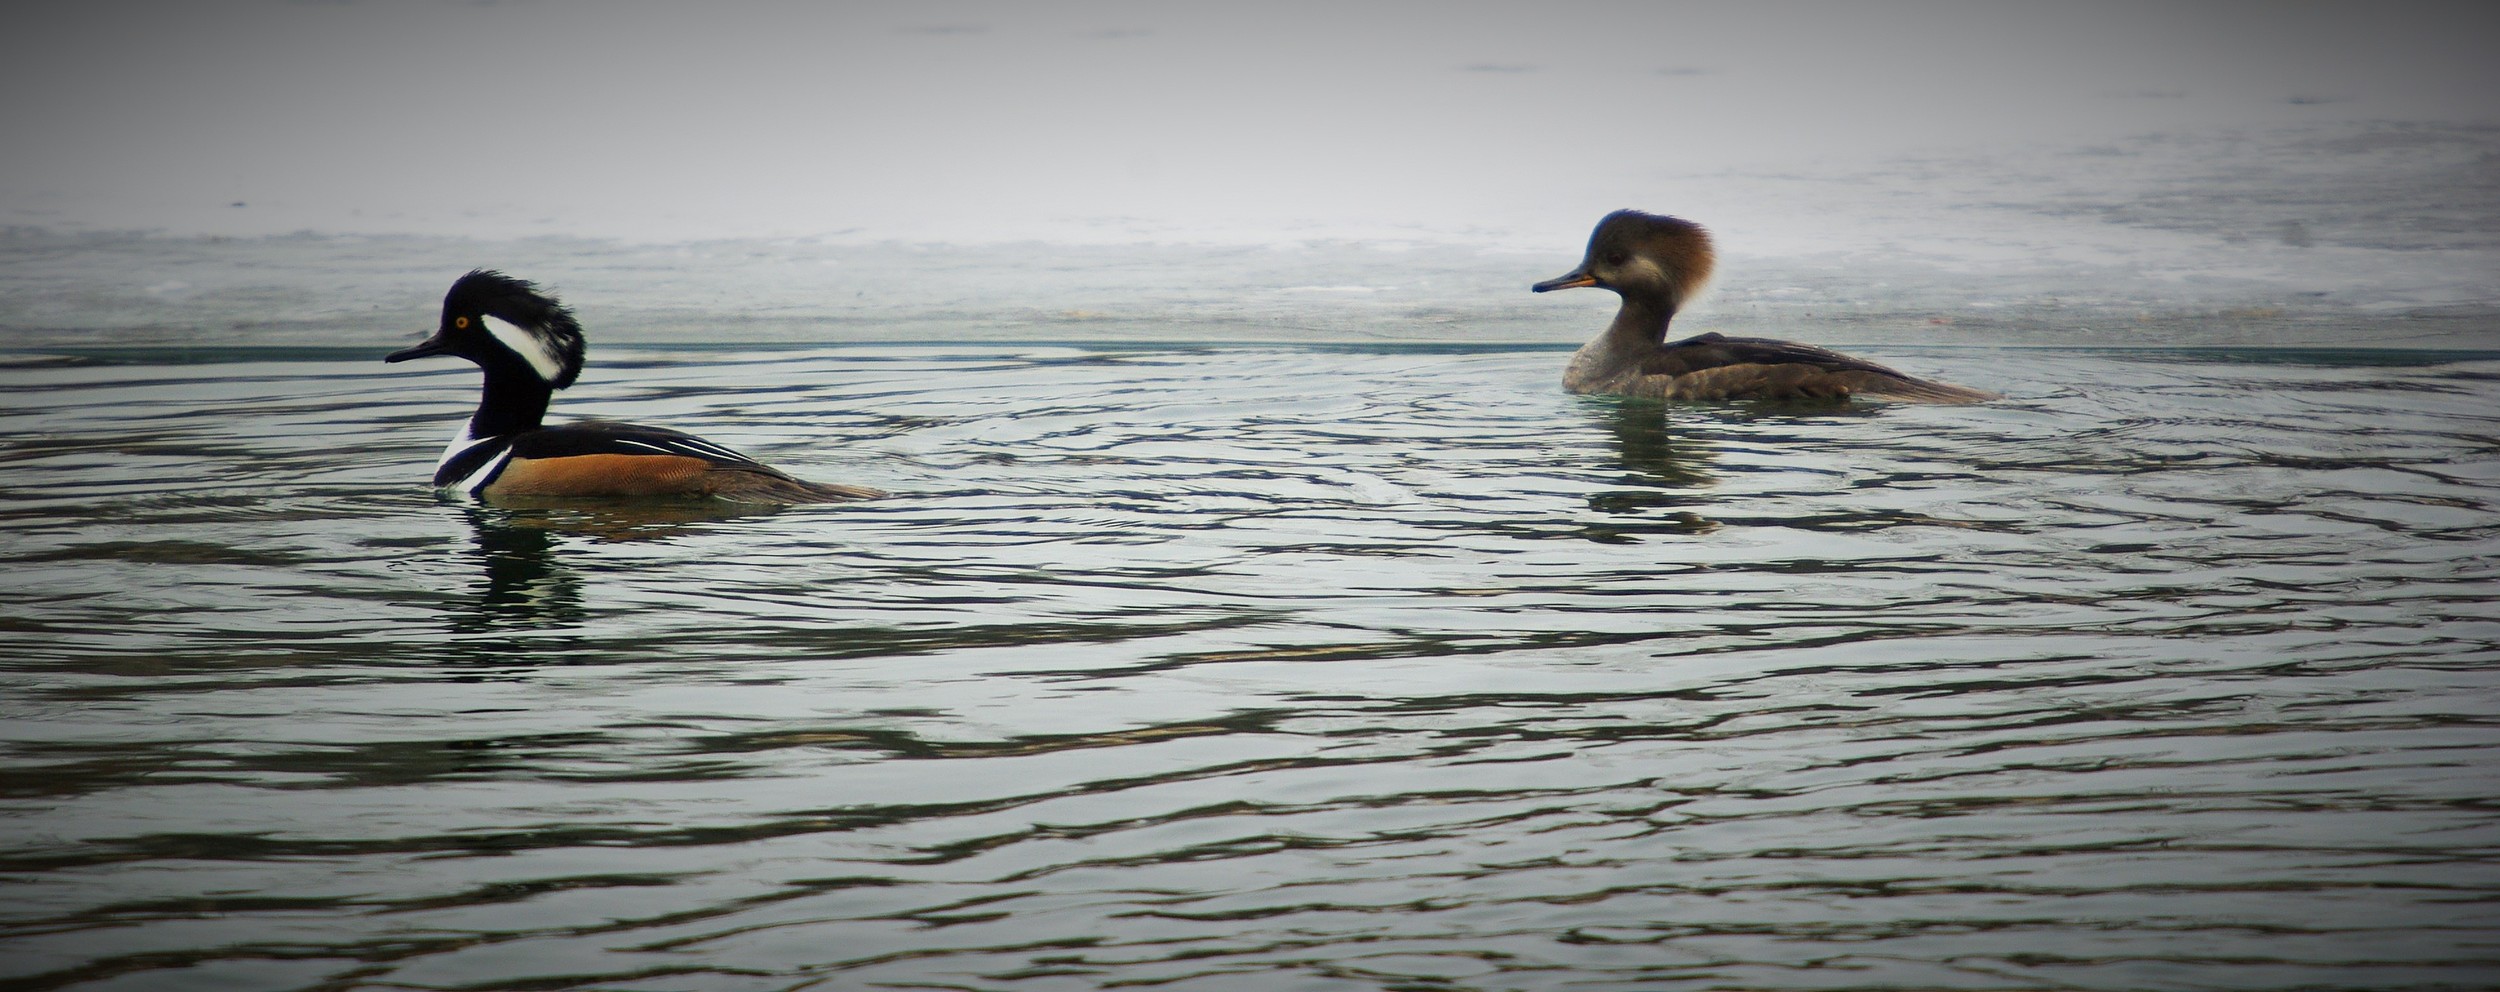   Migratory and wintering waterfowl such as hooded merganser, canvasback, red-head and ring-neck ducks, are a beautiful common sight in Post-Dispatch Lake. Photograph&nbsp;by Patrick Greenwald.  